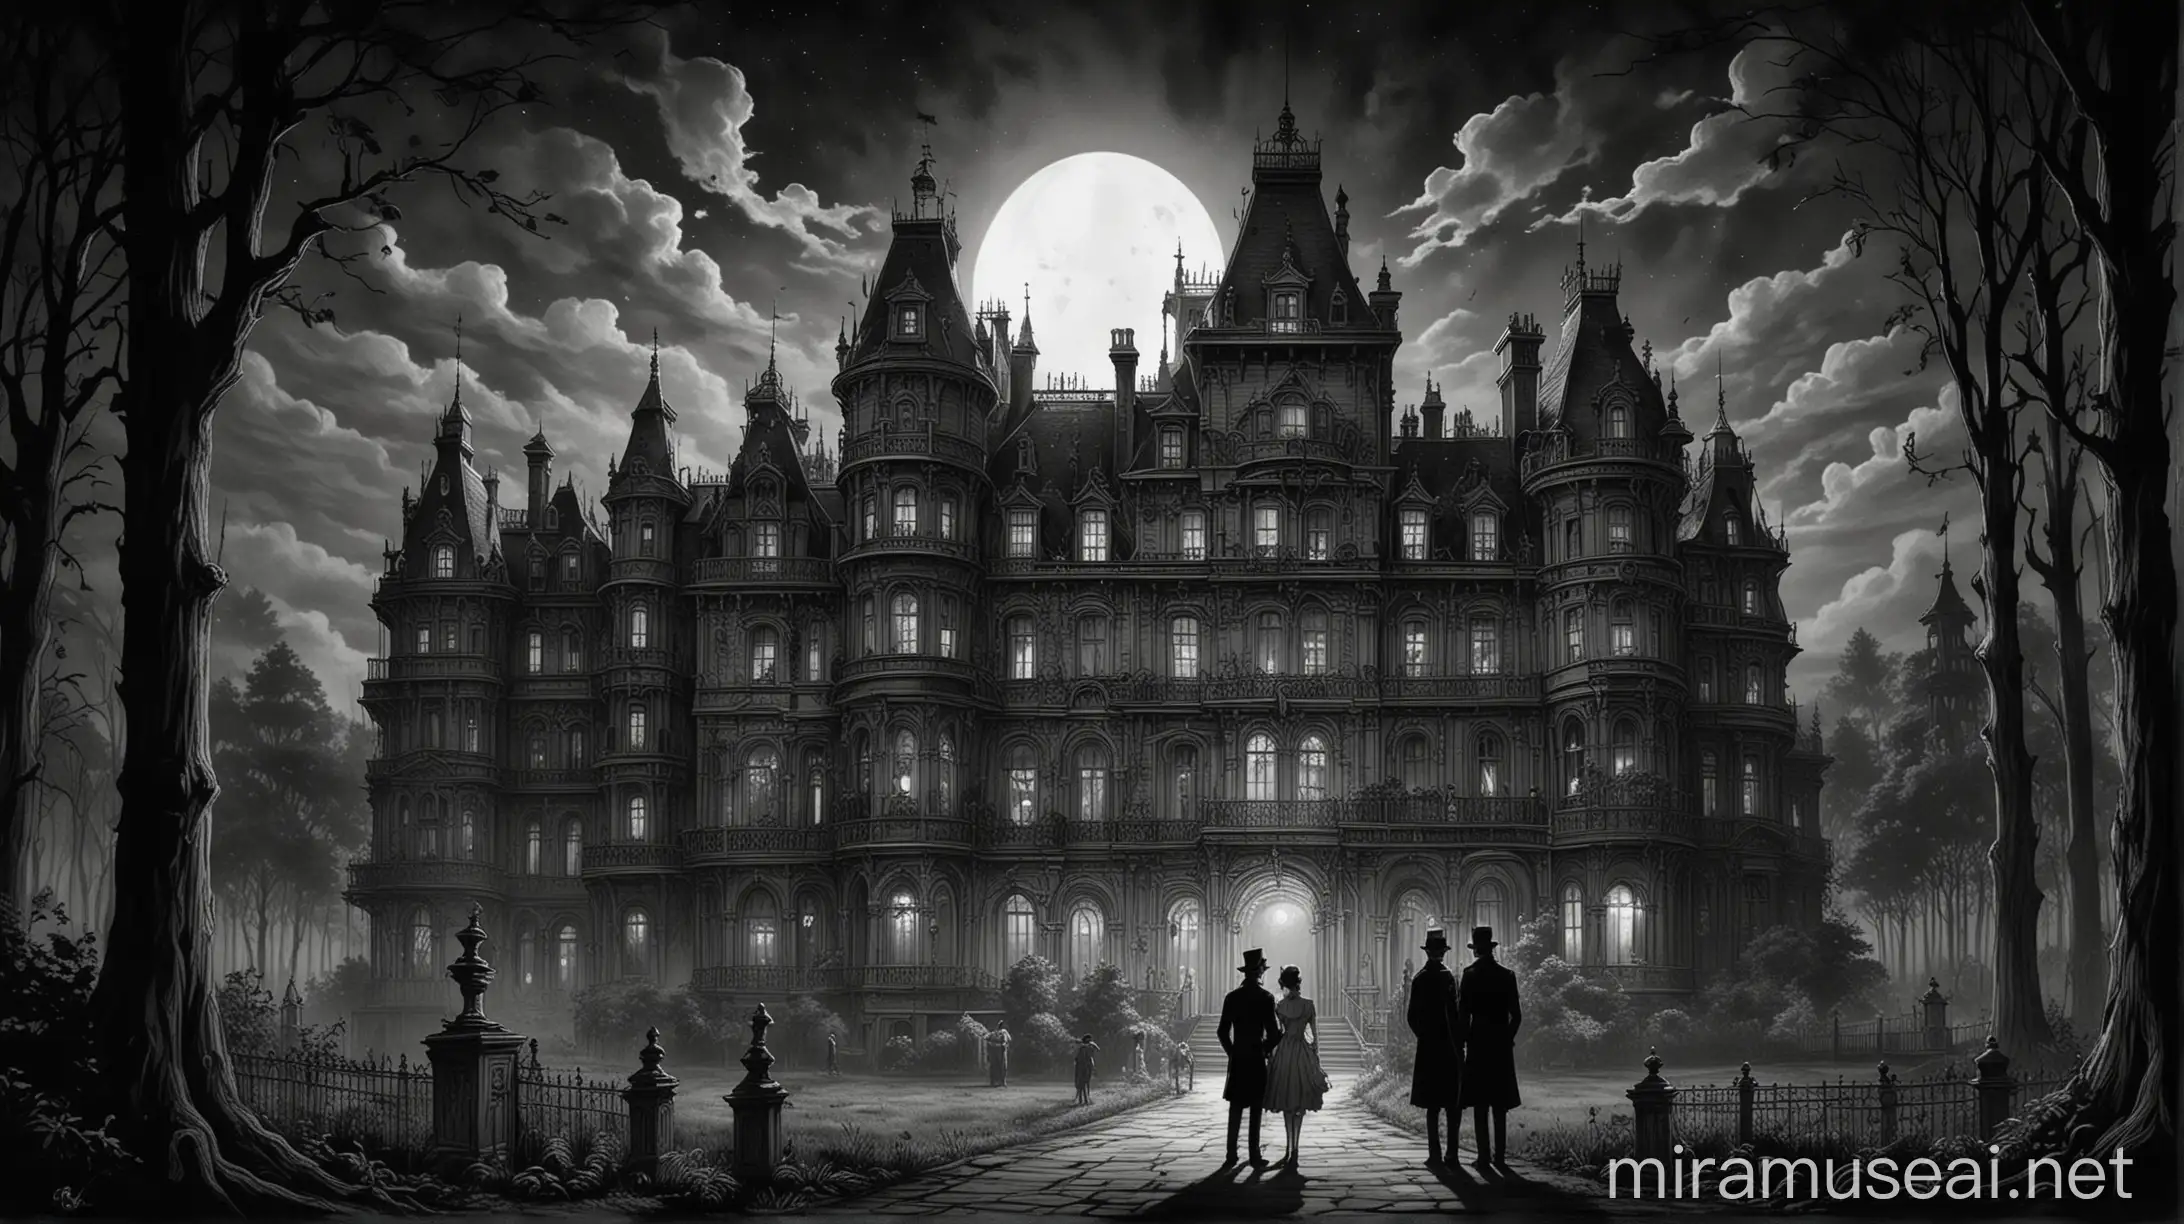 Noir Detectives by Victorian Palace in Tim Burton Style